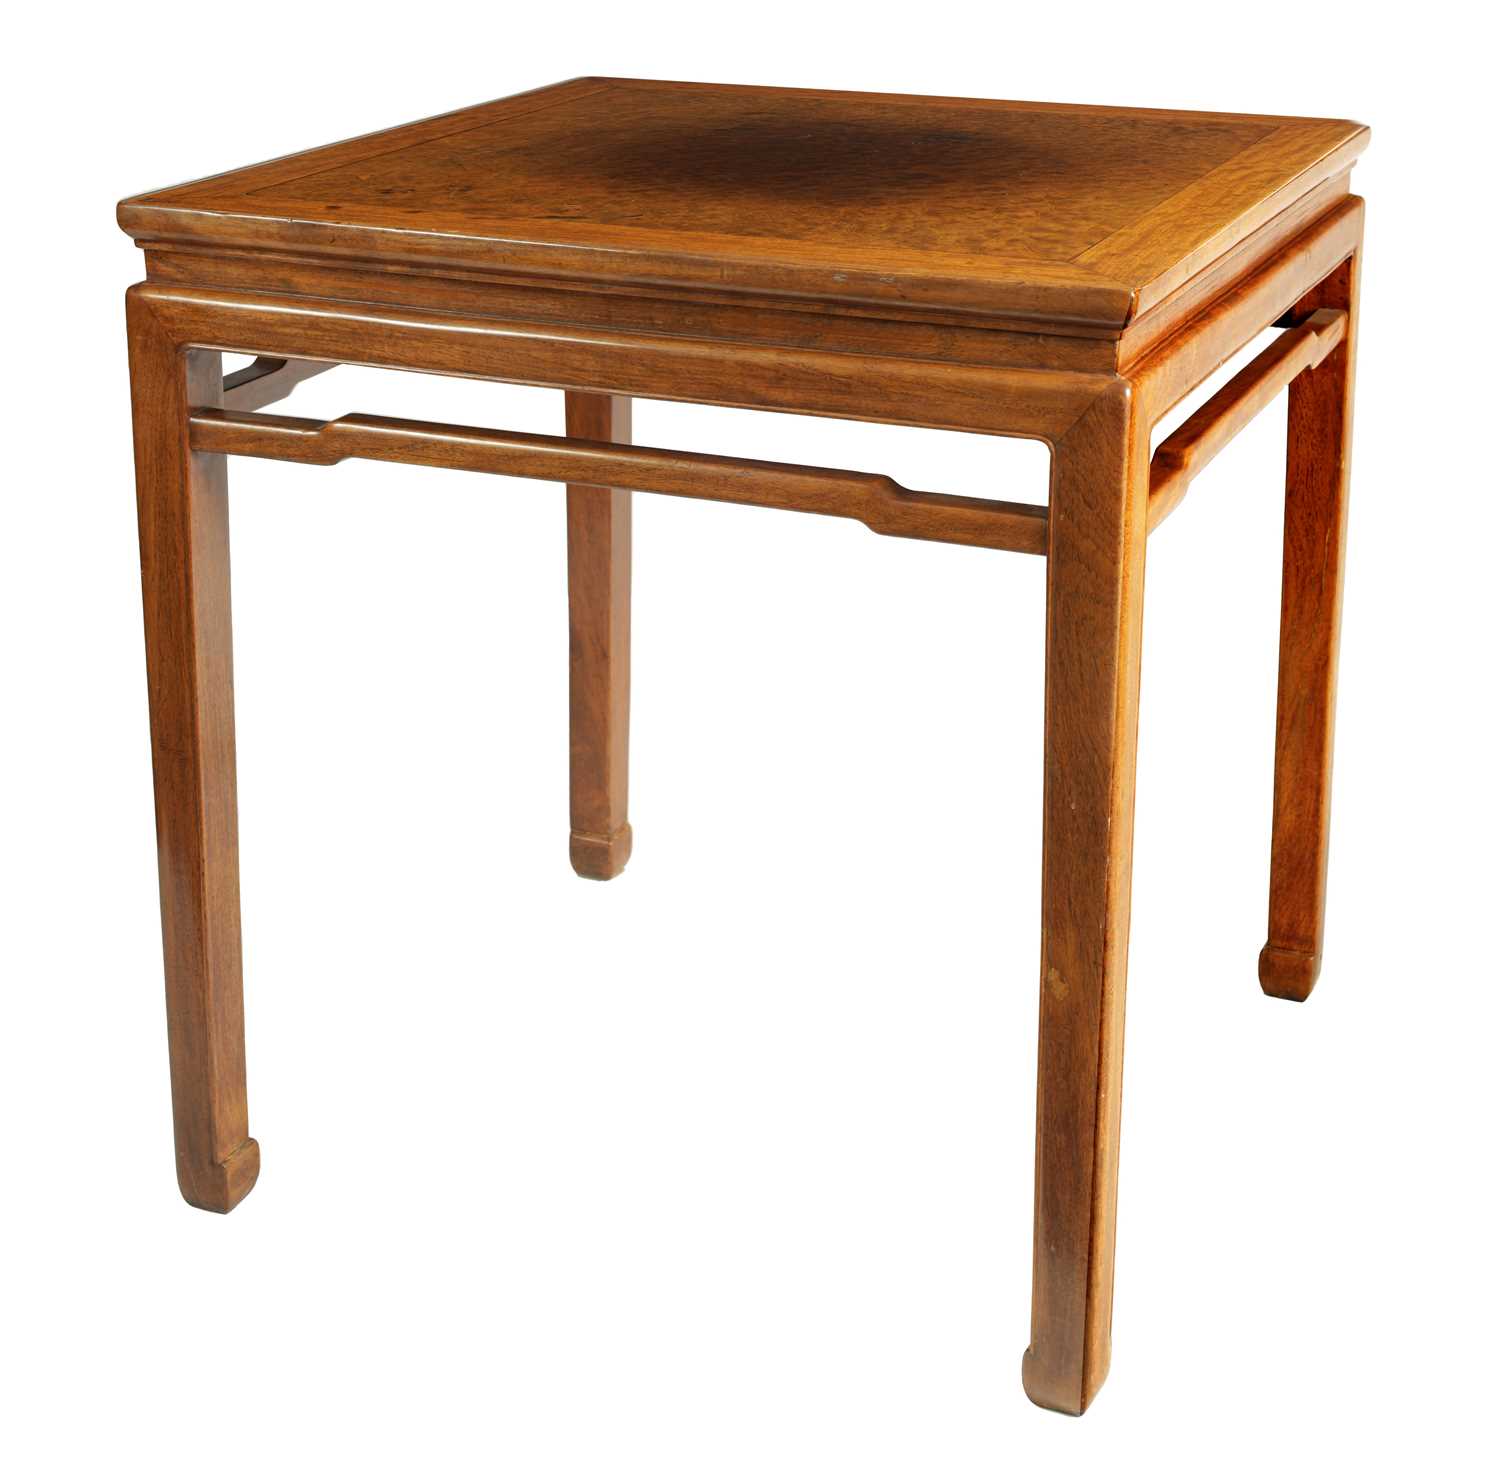 A LATE 19TH CENTURY CHINESE HARDWOOD AND BURRWOOD SQUARE TOP TABLE